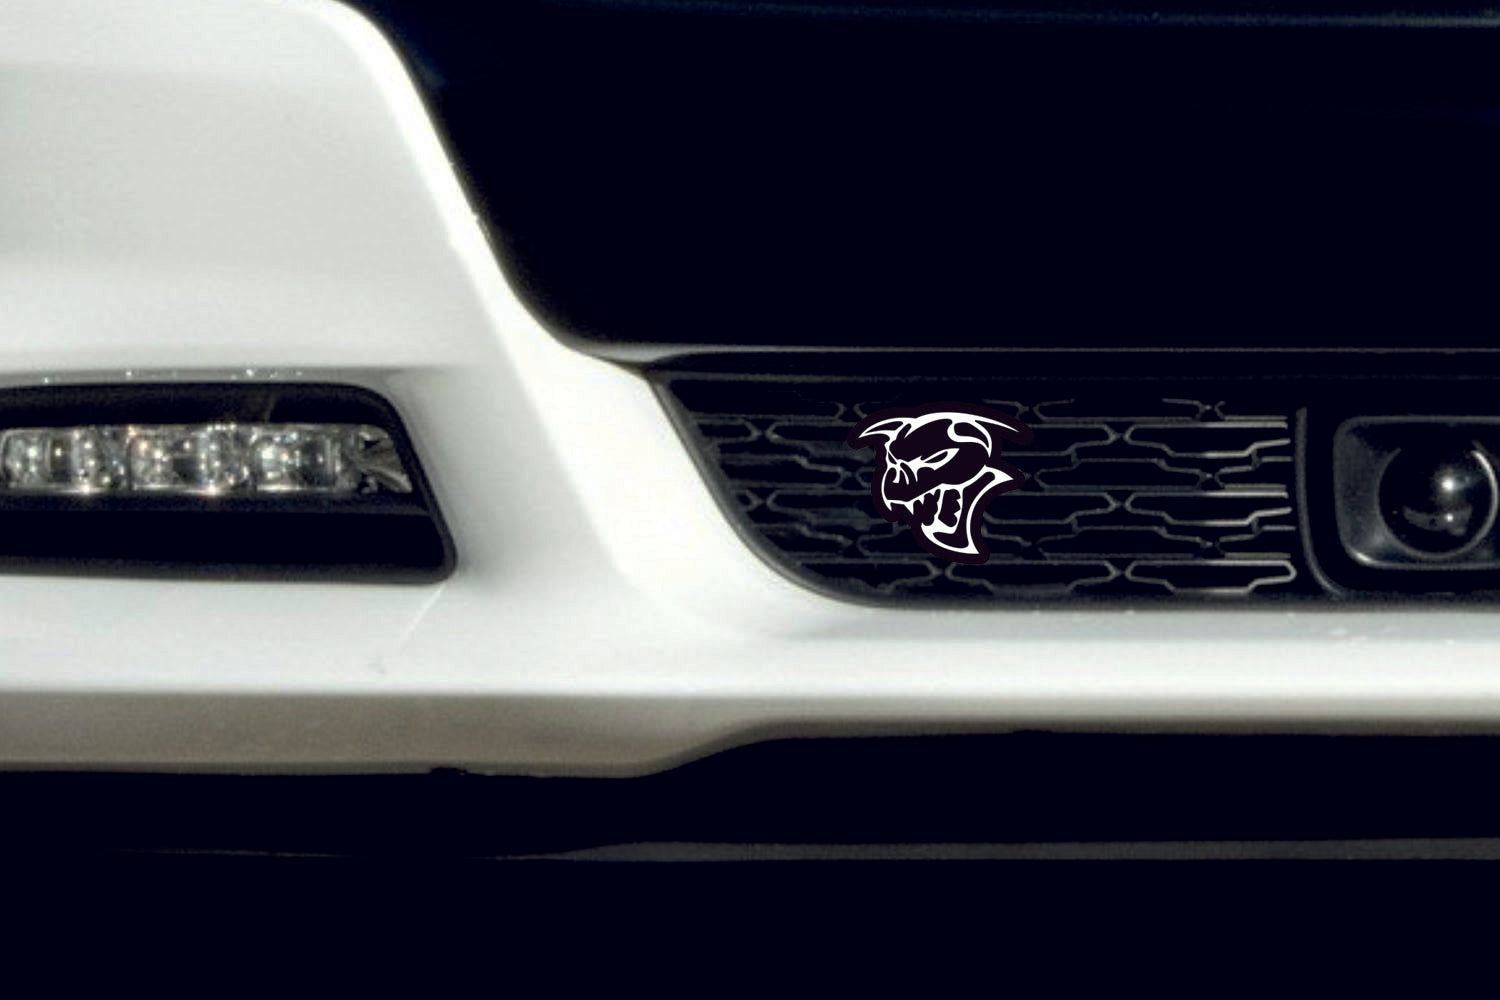 DODGE Radiator grille emblem with Ghoul logo - decoinfabric